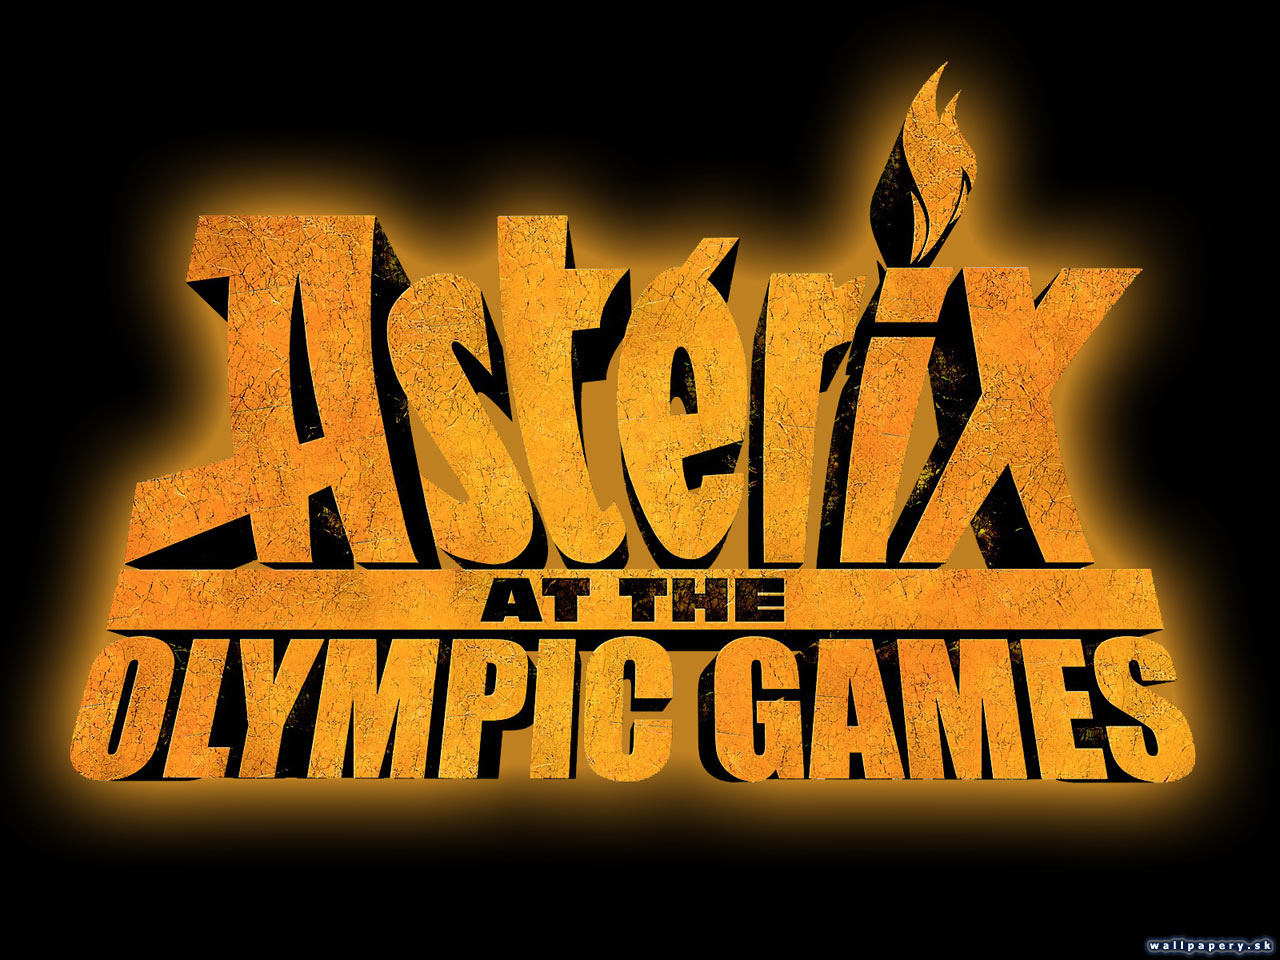 Asterix at the Olympic Games - wallpaper 1